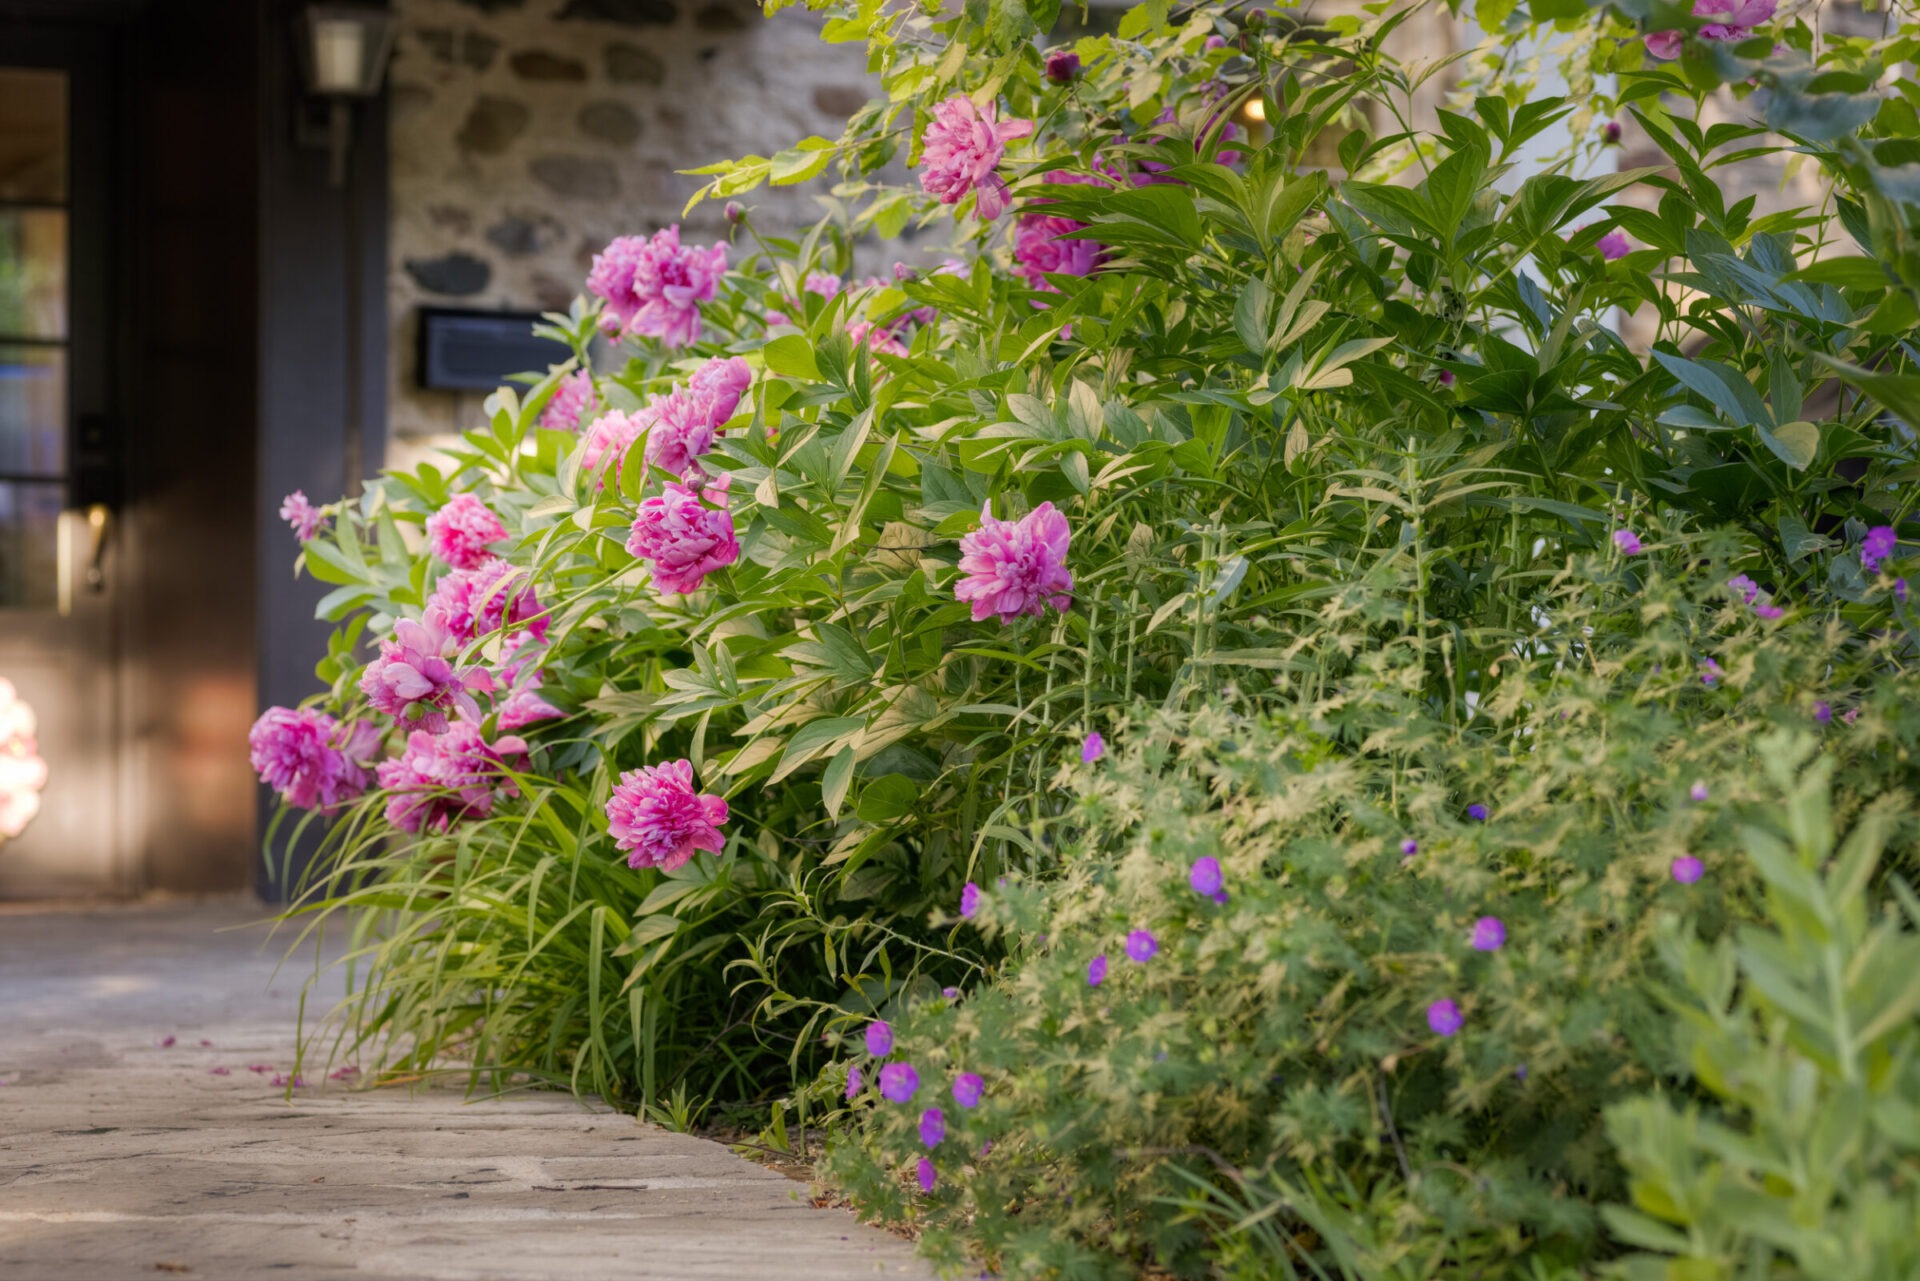 A stone pathway flanked by lush greenery and vibrant pink peonies leads to a house's entrance with a glass door partially visible.